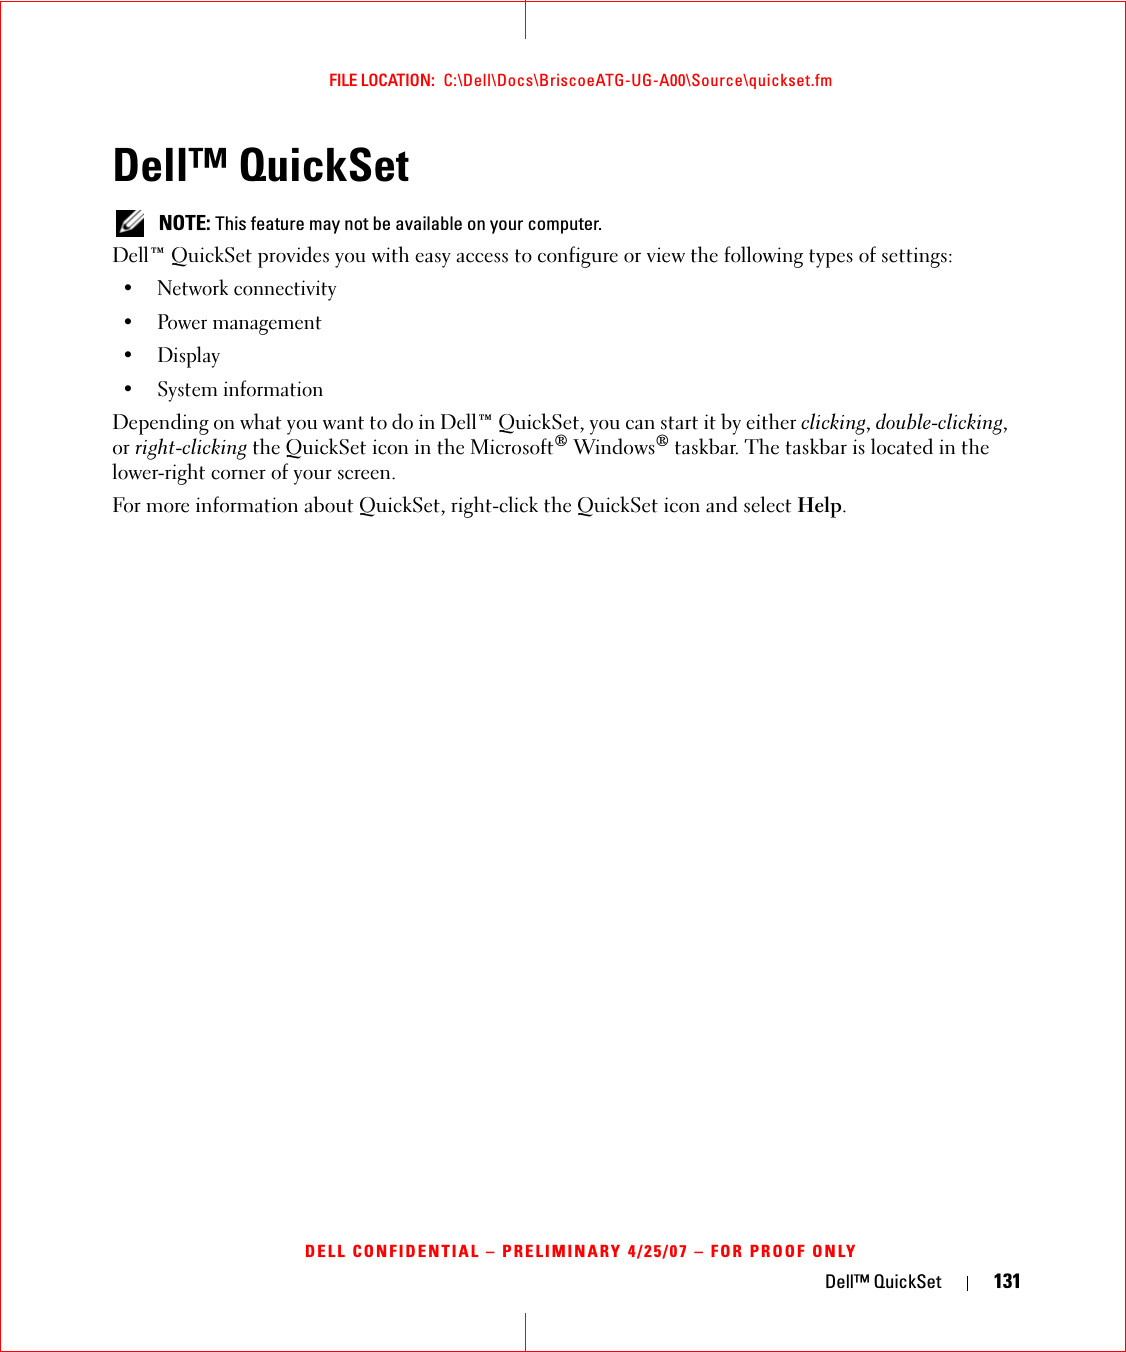 Dell™ QuickSet 131FILE LOCATION:  C:\Dell\Docs\BriscoeATG-UG-A00\Source\quickset.fmDELL CONFIDENTIAL – PRELIMINARY 4/25/07 – FOR PROOF ONLYDell™ QuickSet  NOTE: This feature may not be available on your computer.Dell™ QuickSet provides you with easy access to configure or view the following types of settings:• Network connectivity• Power management•Display• System informationDepending on what you want to do in Dell™ QuickSet, you can start it by either clicking, double-clicking, or right-clicking the QuickSet icon in the Microsoft® Windows® taskbar. The taskbar is located in the lower-right corner of your screen.For more information about QuickSet, right-click the QuickSet icon and select Help.